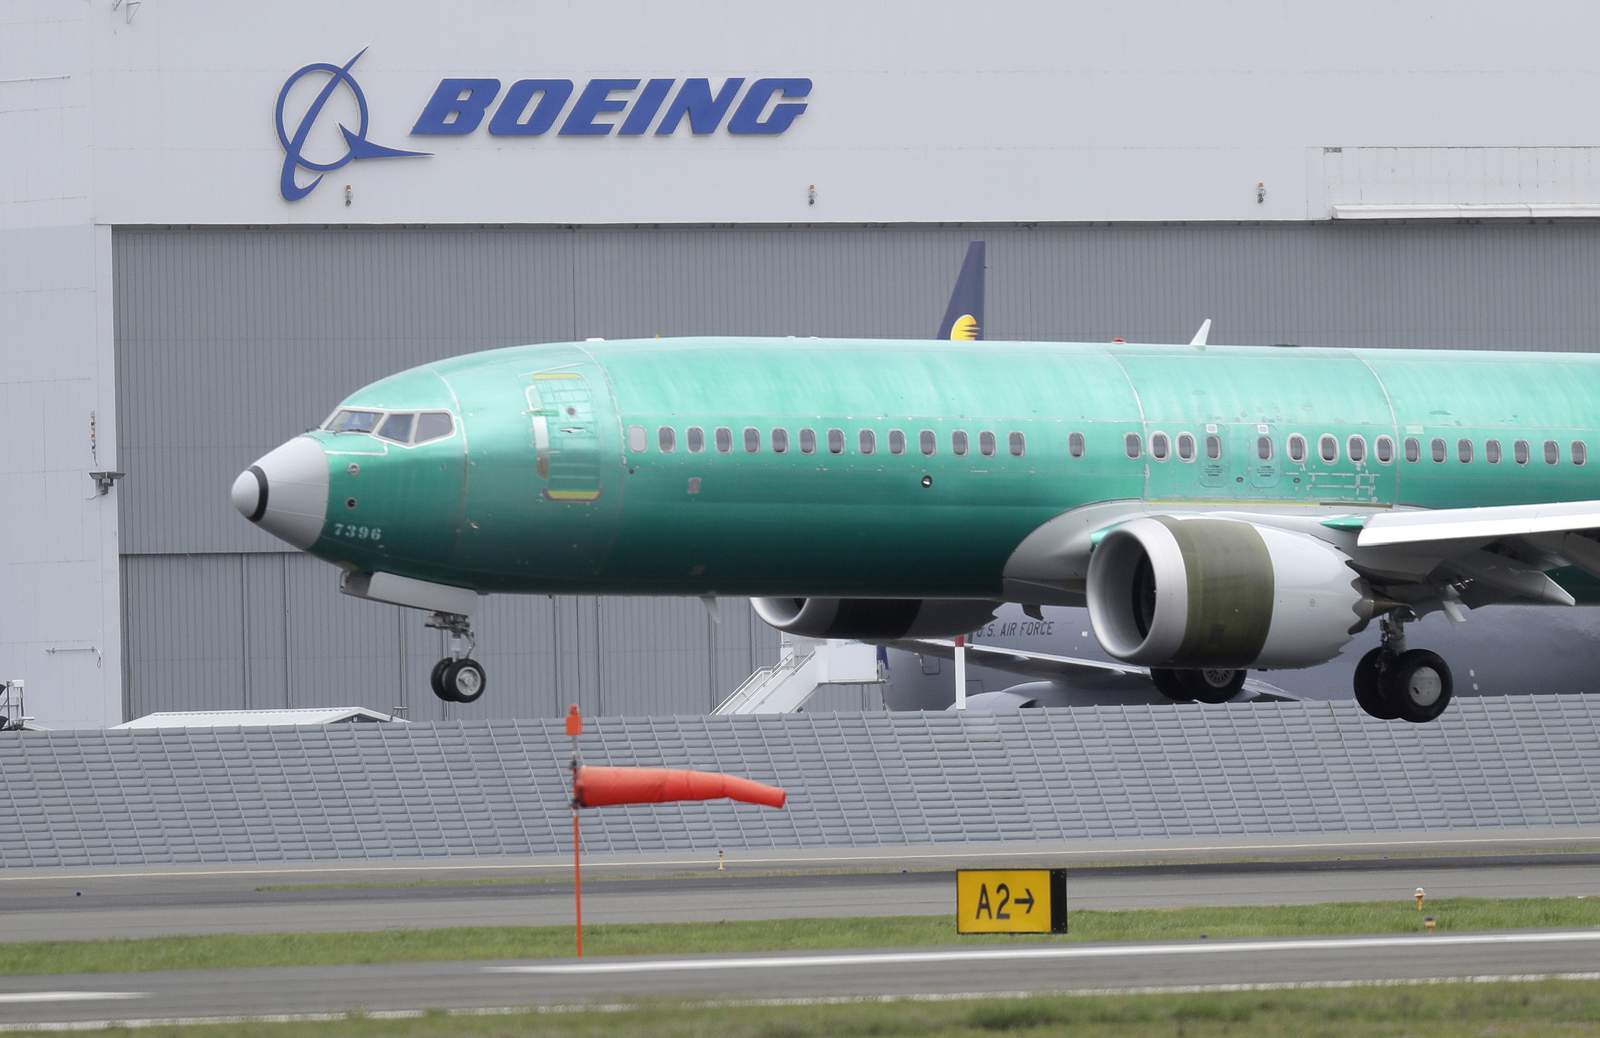 Troubles abound, Boeing losses bloom to $2.4 billion in 2Q